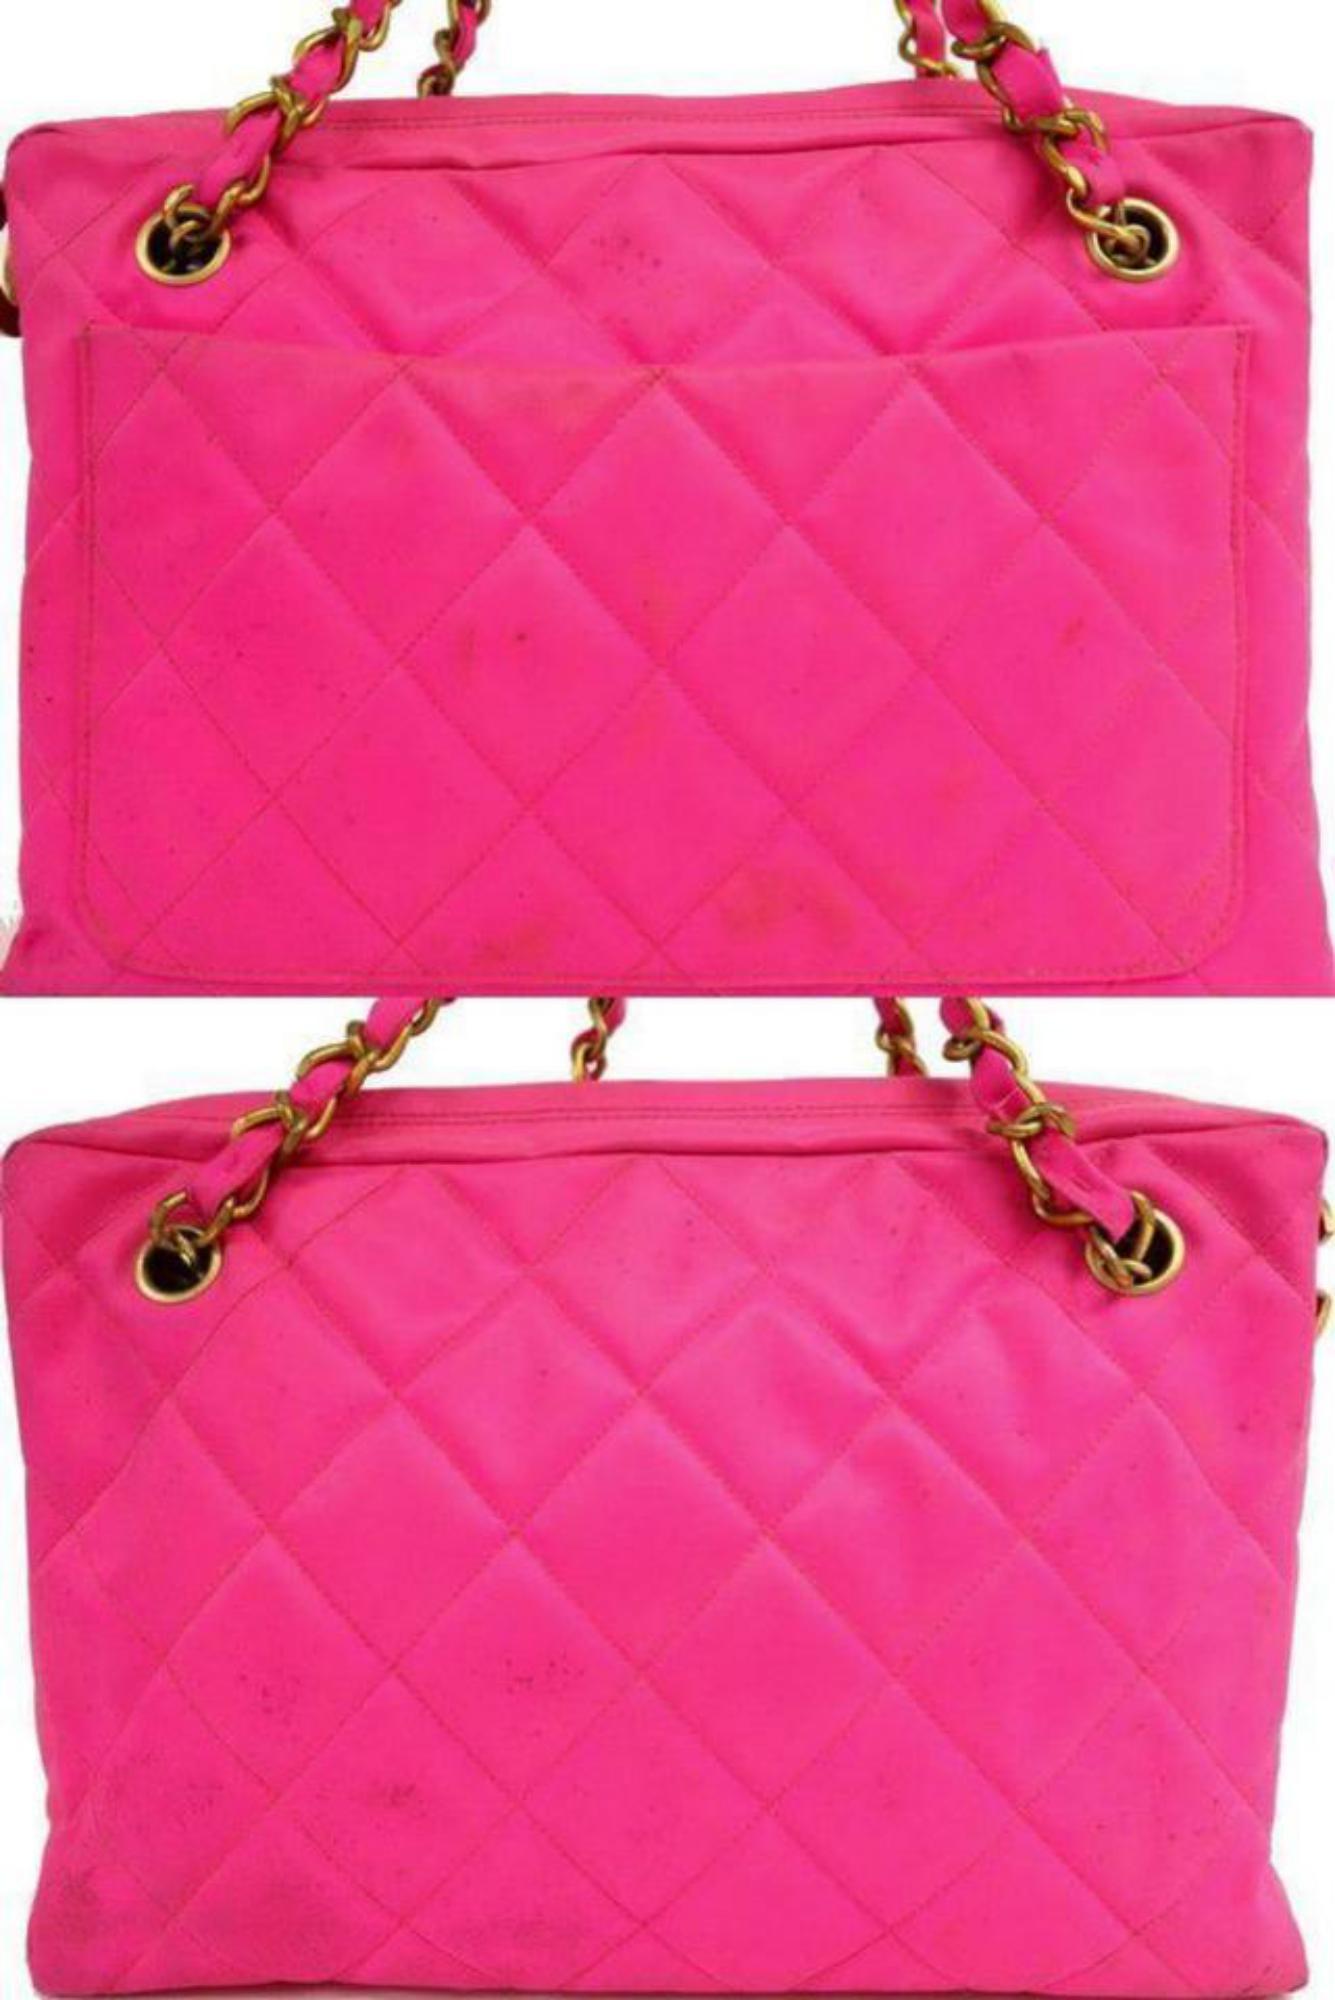 Chanel Camera Quilted Neon Hot Cc Charm Chain Tote 231187 Pink Canvas Shoulder B For Sale 6